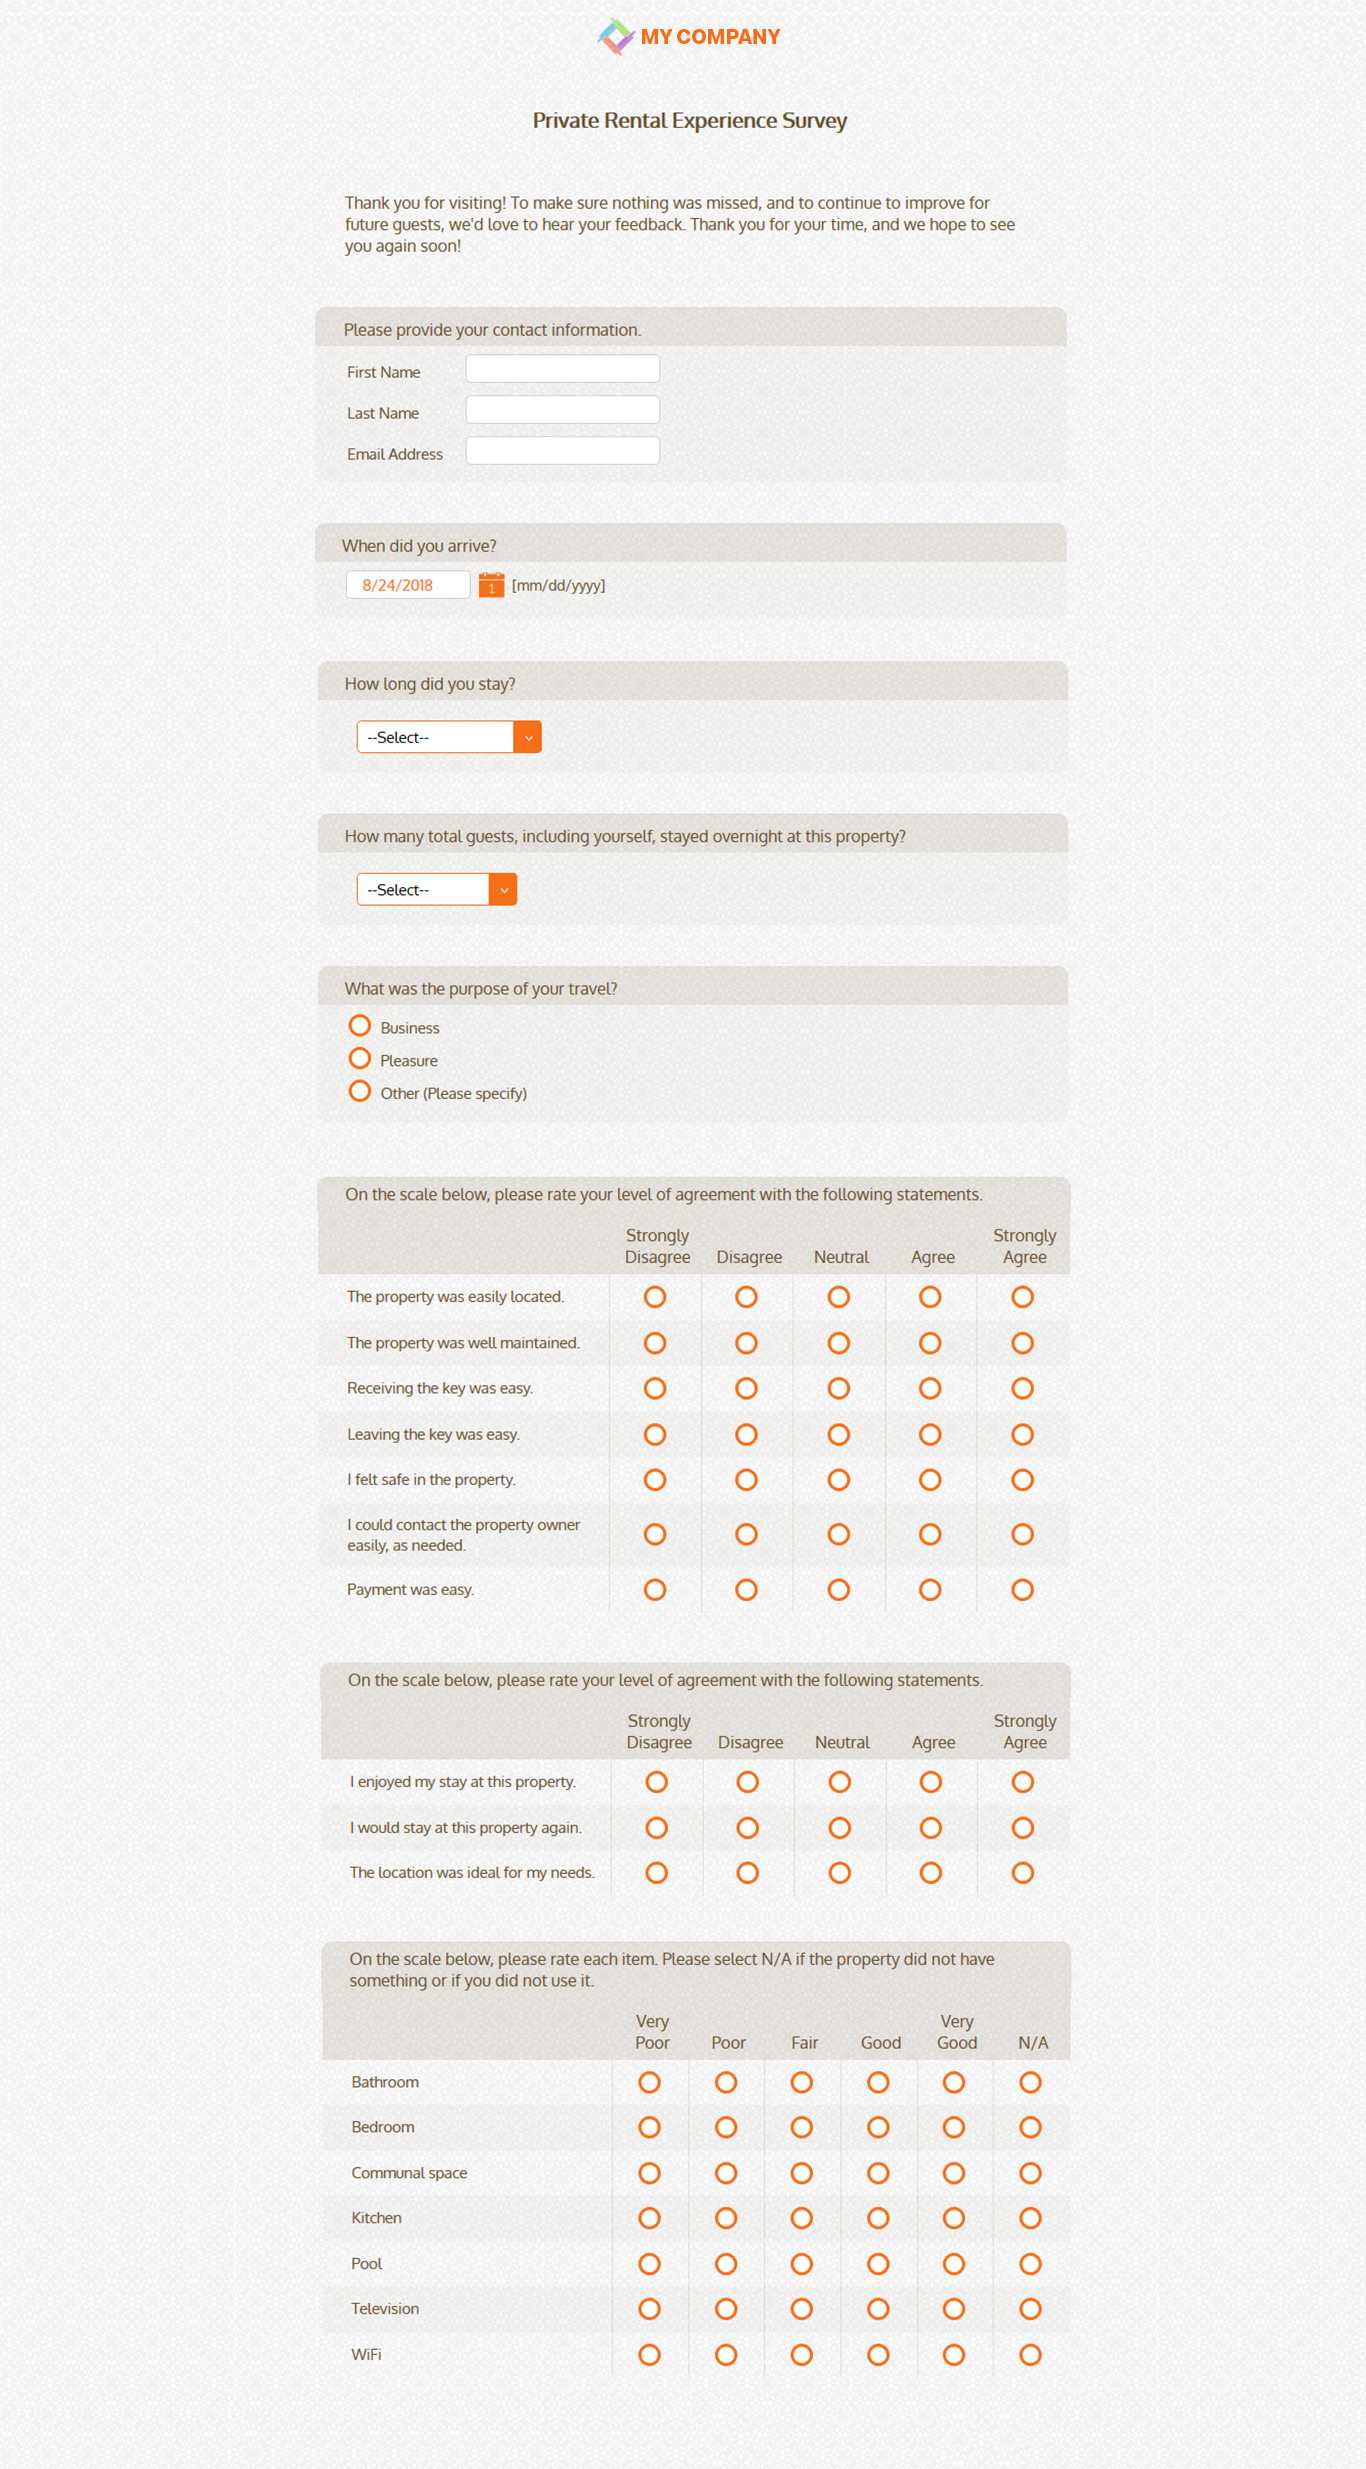 Rental Experience Survey Template [12 Questions] | Sogosurvey In Poll Template For Word